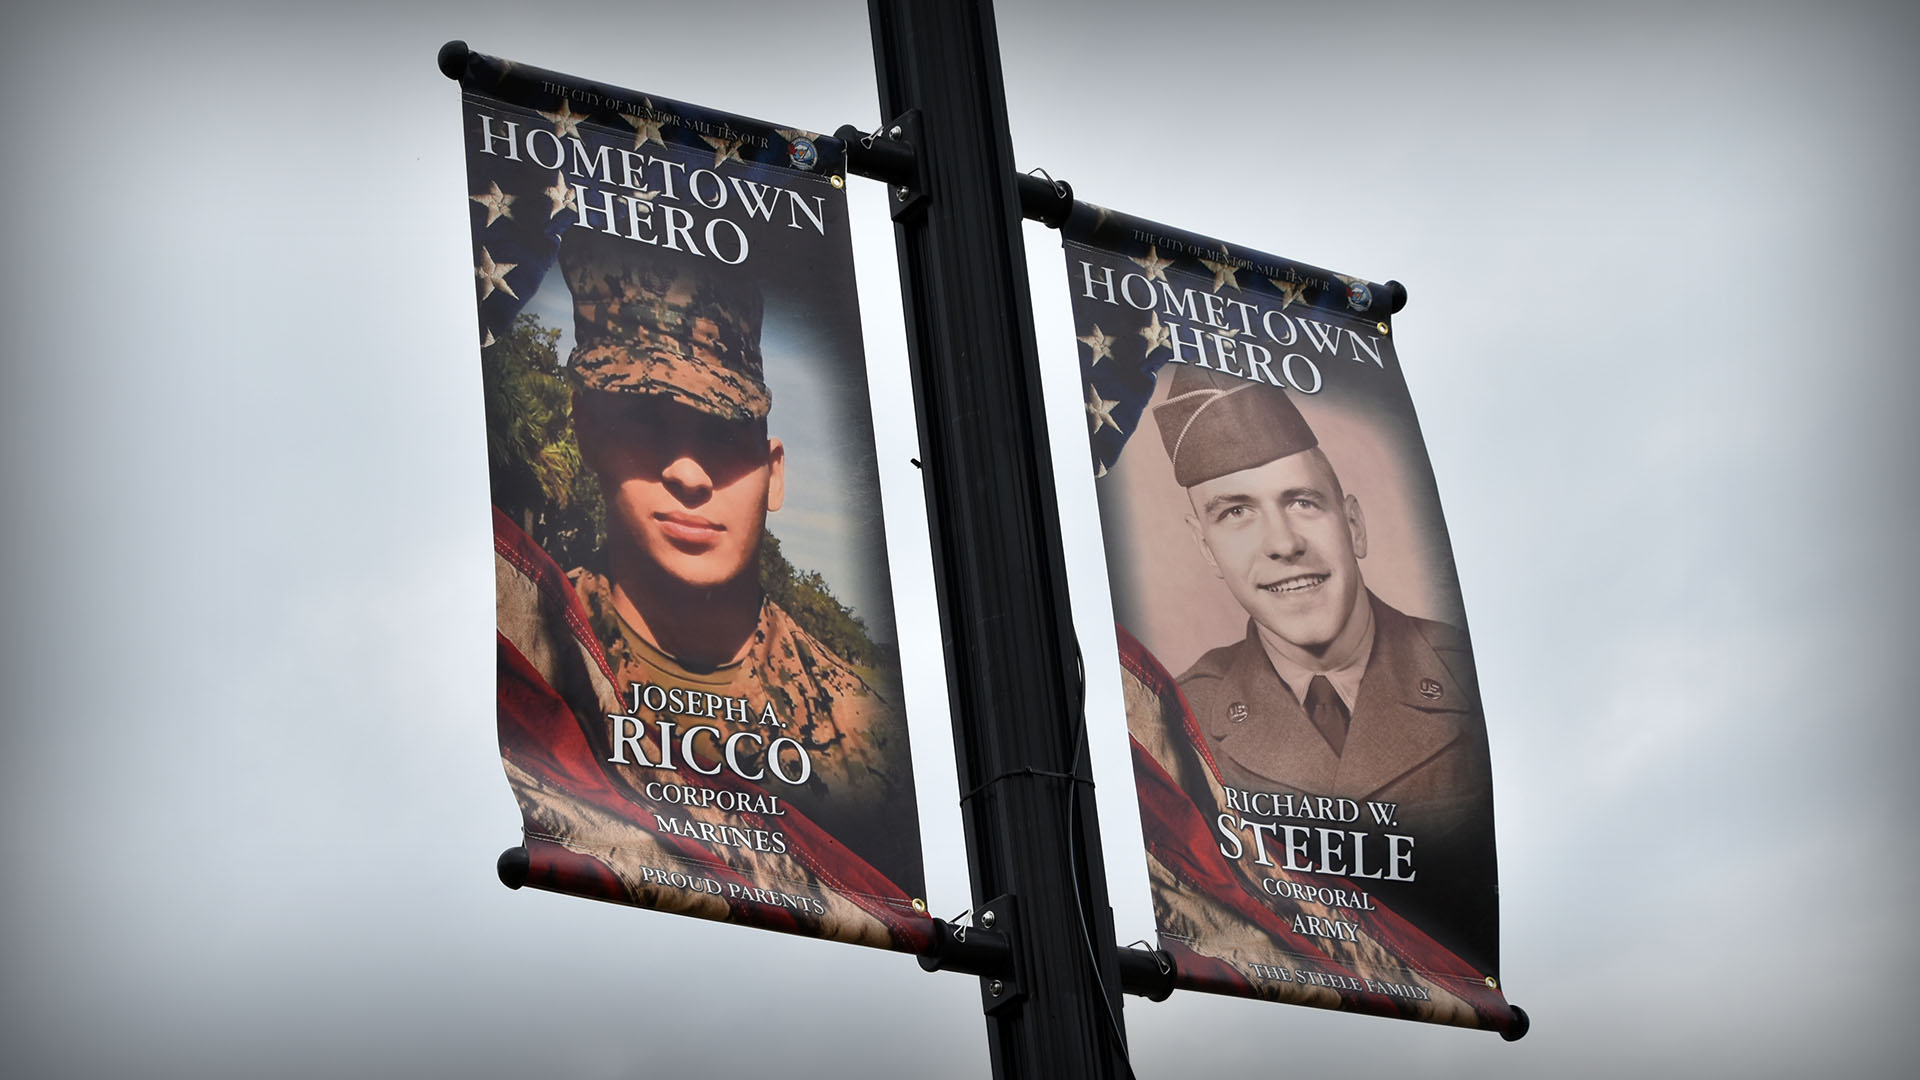 Image of Mentor Hometown Heroes banners hanging on a streetlight.